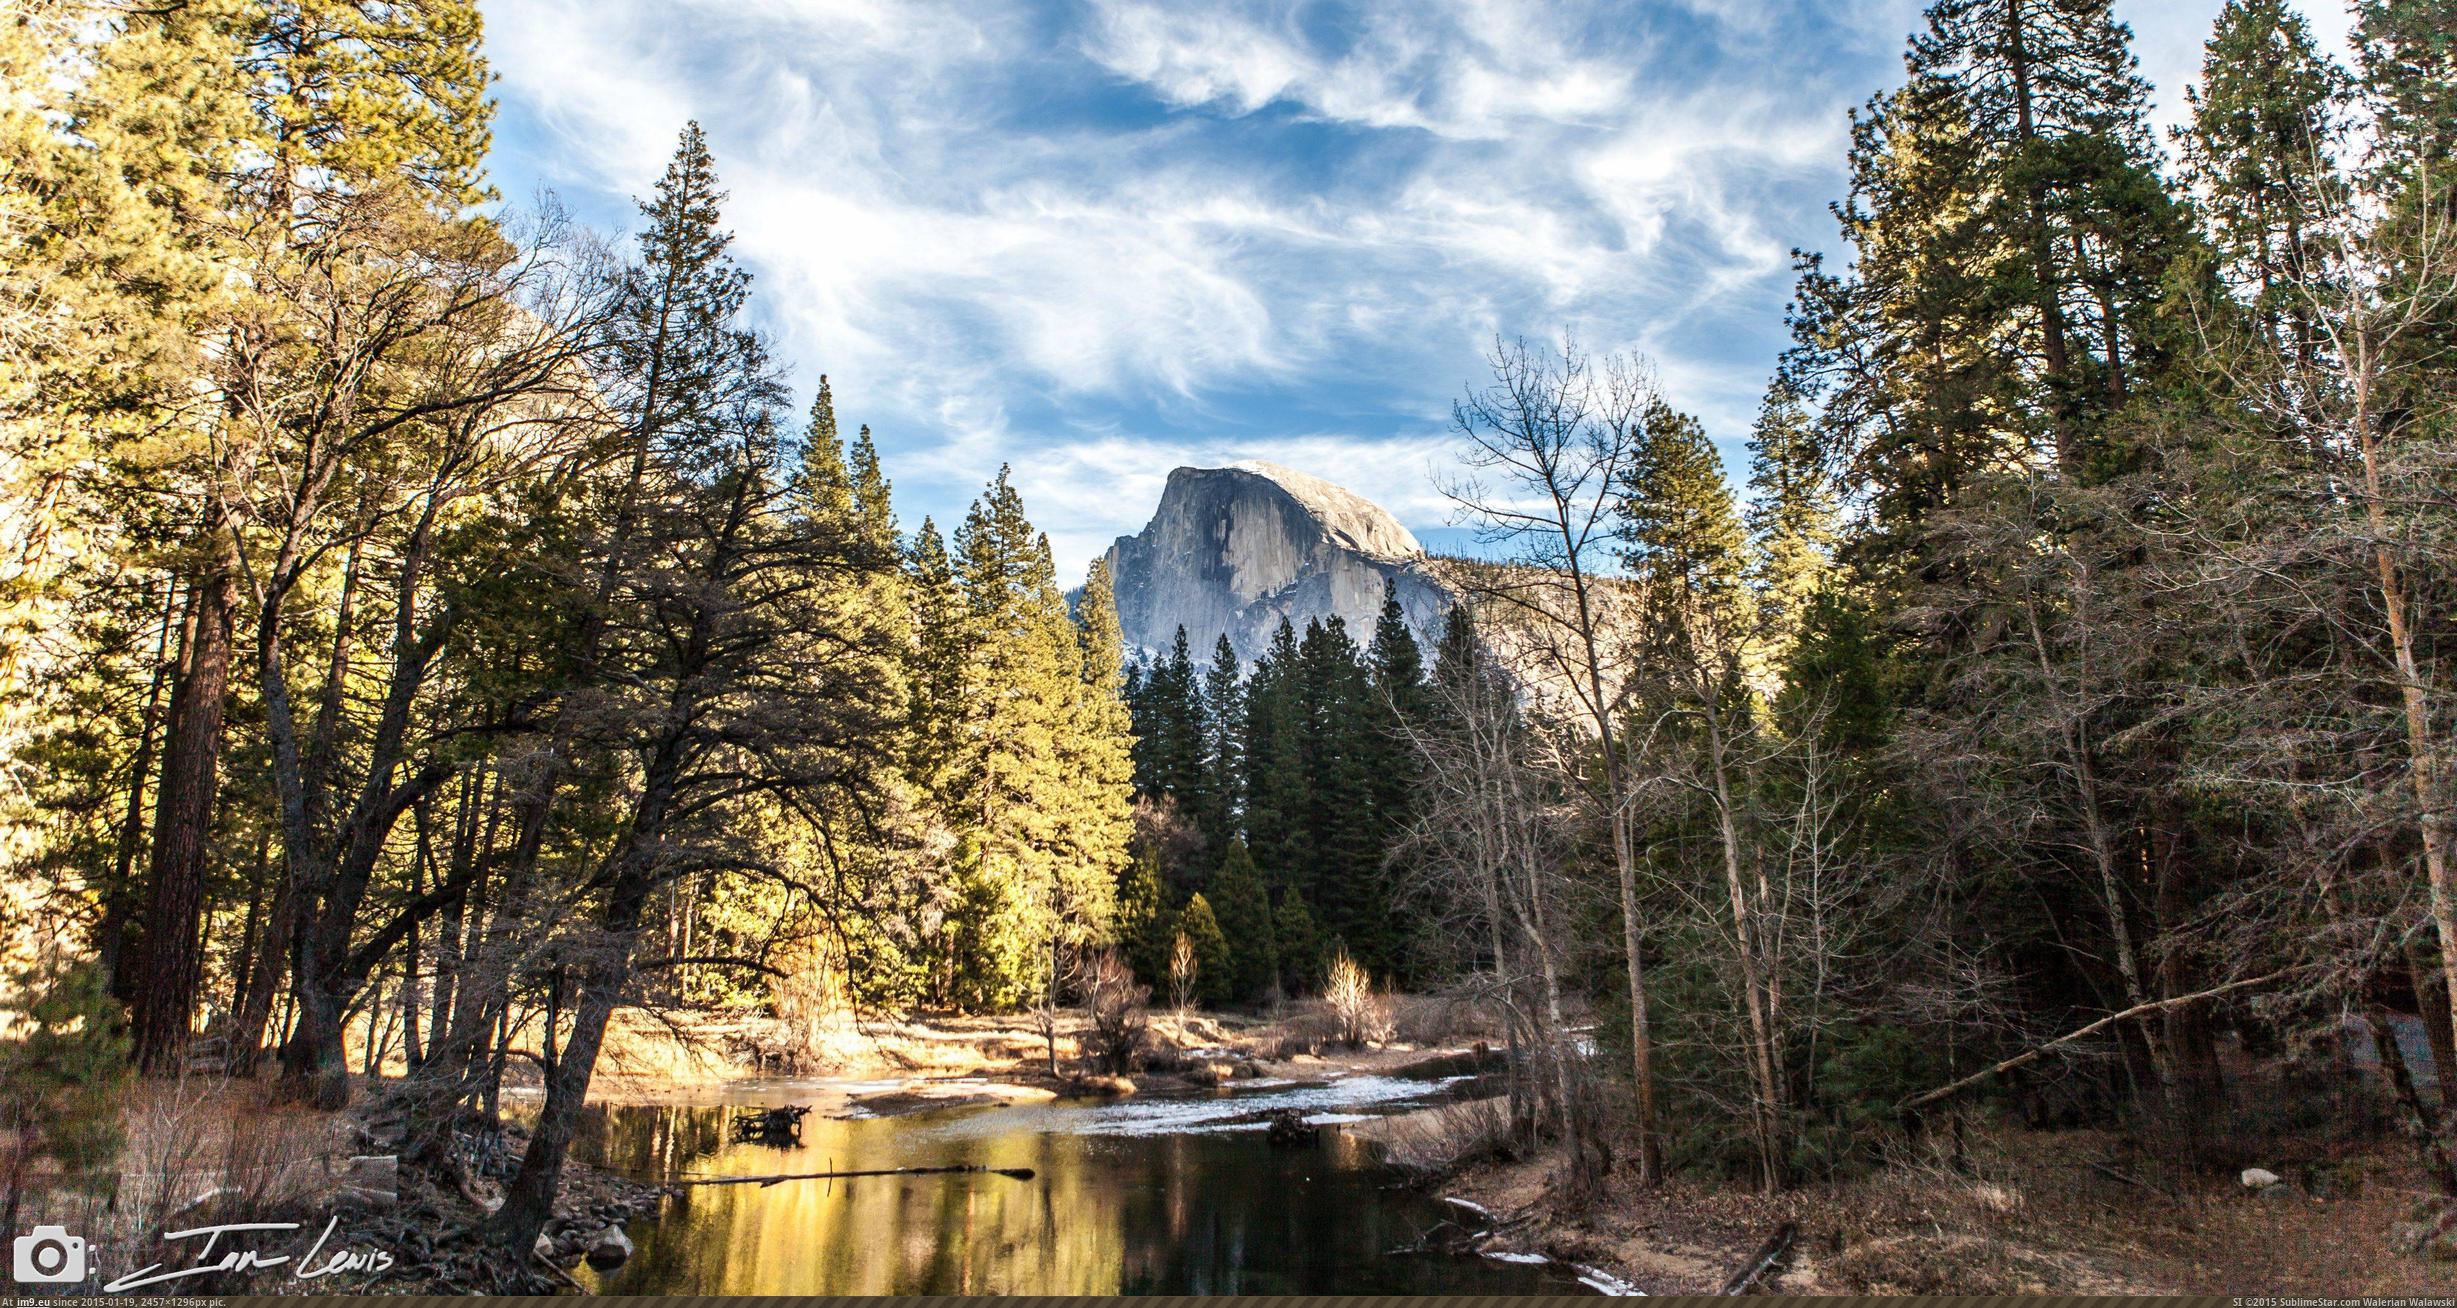 [Earthporn] Half Dome from Sentinel Bridge in Yosemite Valley, CA - Jan 2015  [5461x2880] (in My r/EARTHPORN favs)